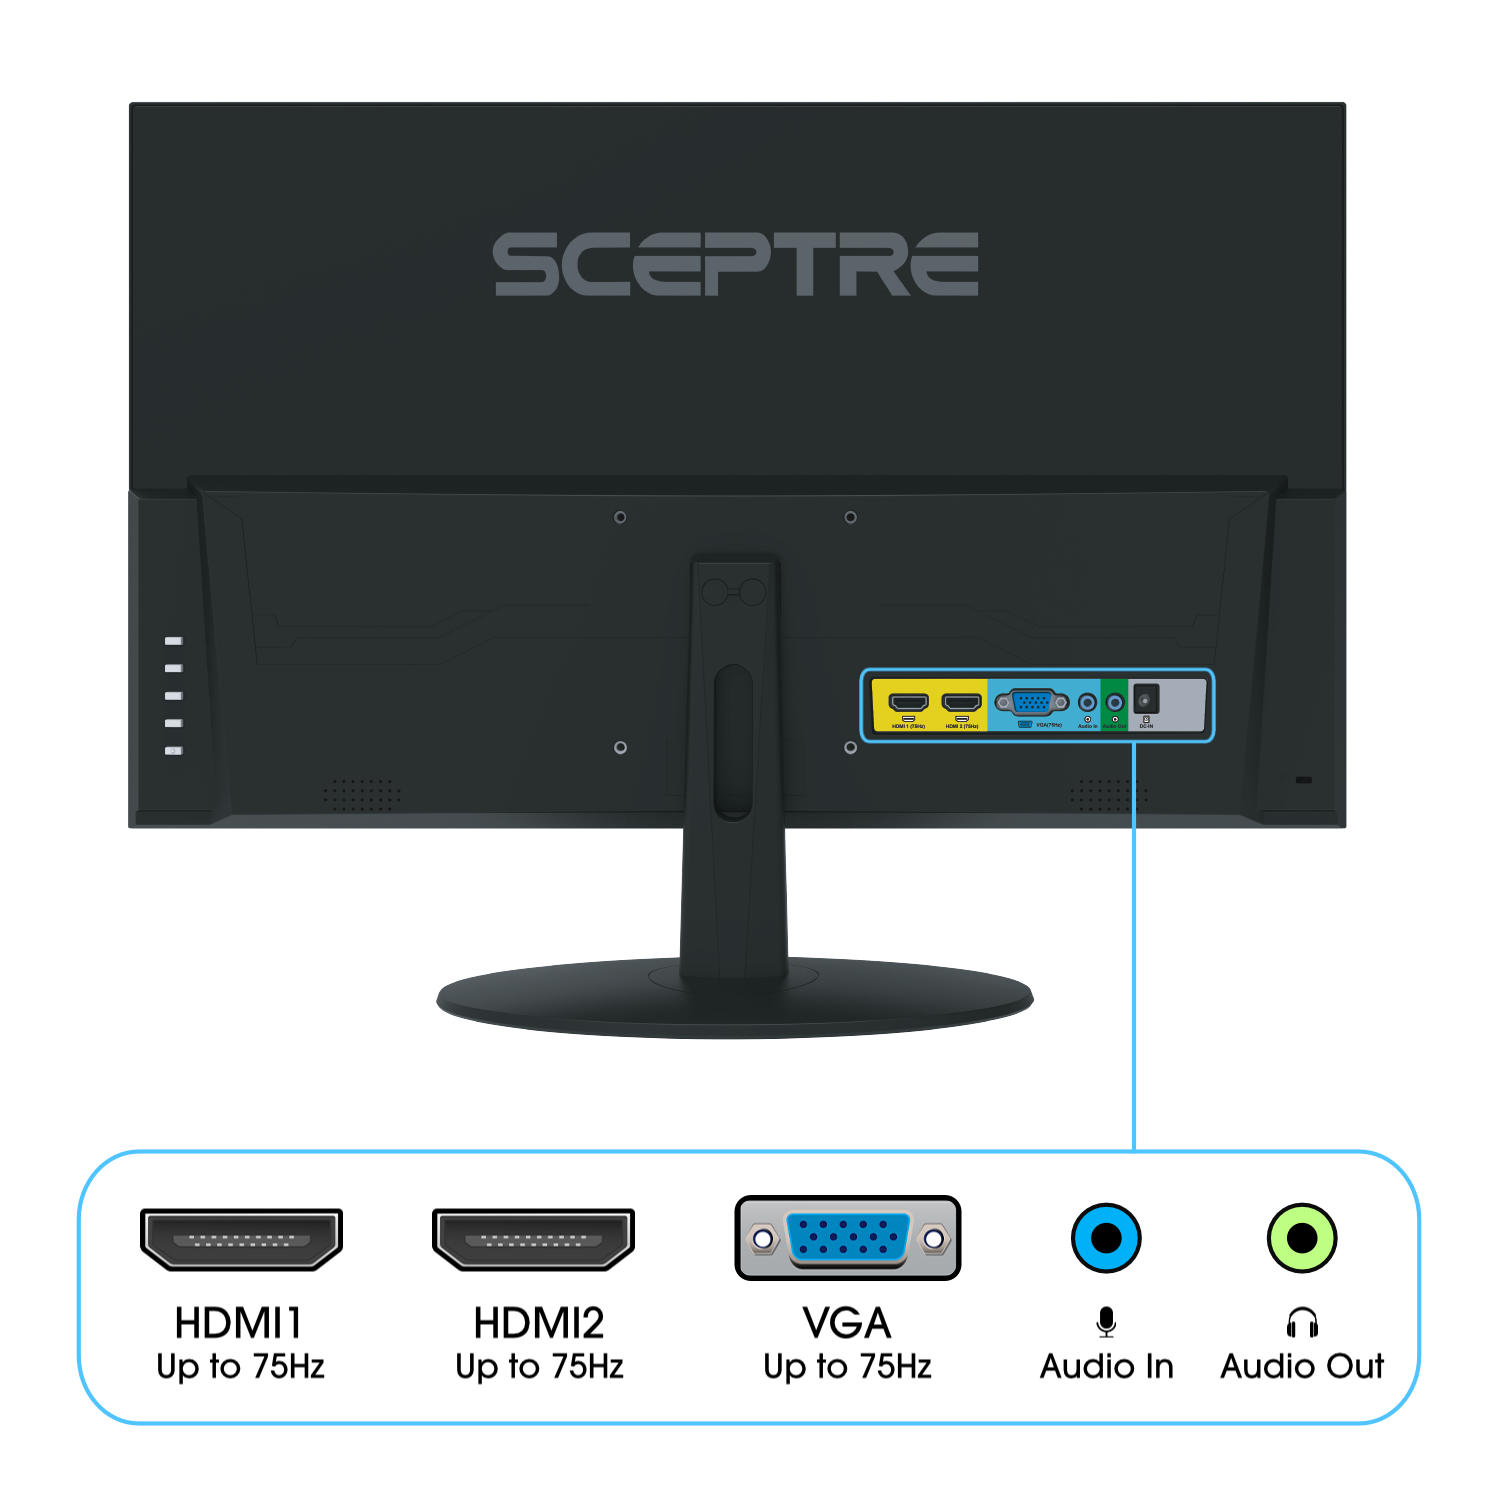 Sceptre IPS 27-inch Computer Monitor 1080p 75Hz HDMI Built-in Speakers, Machine Black (E275W-FPT) - image 3 of 7